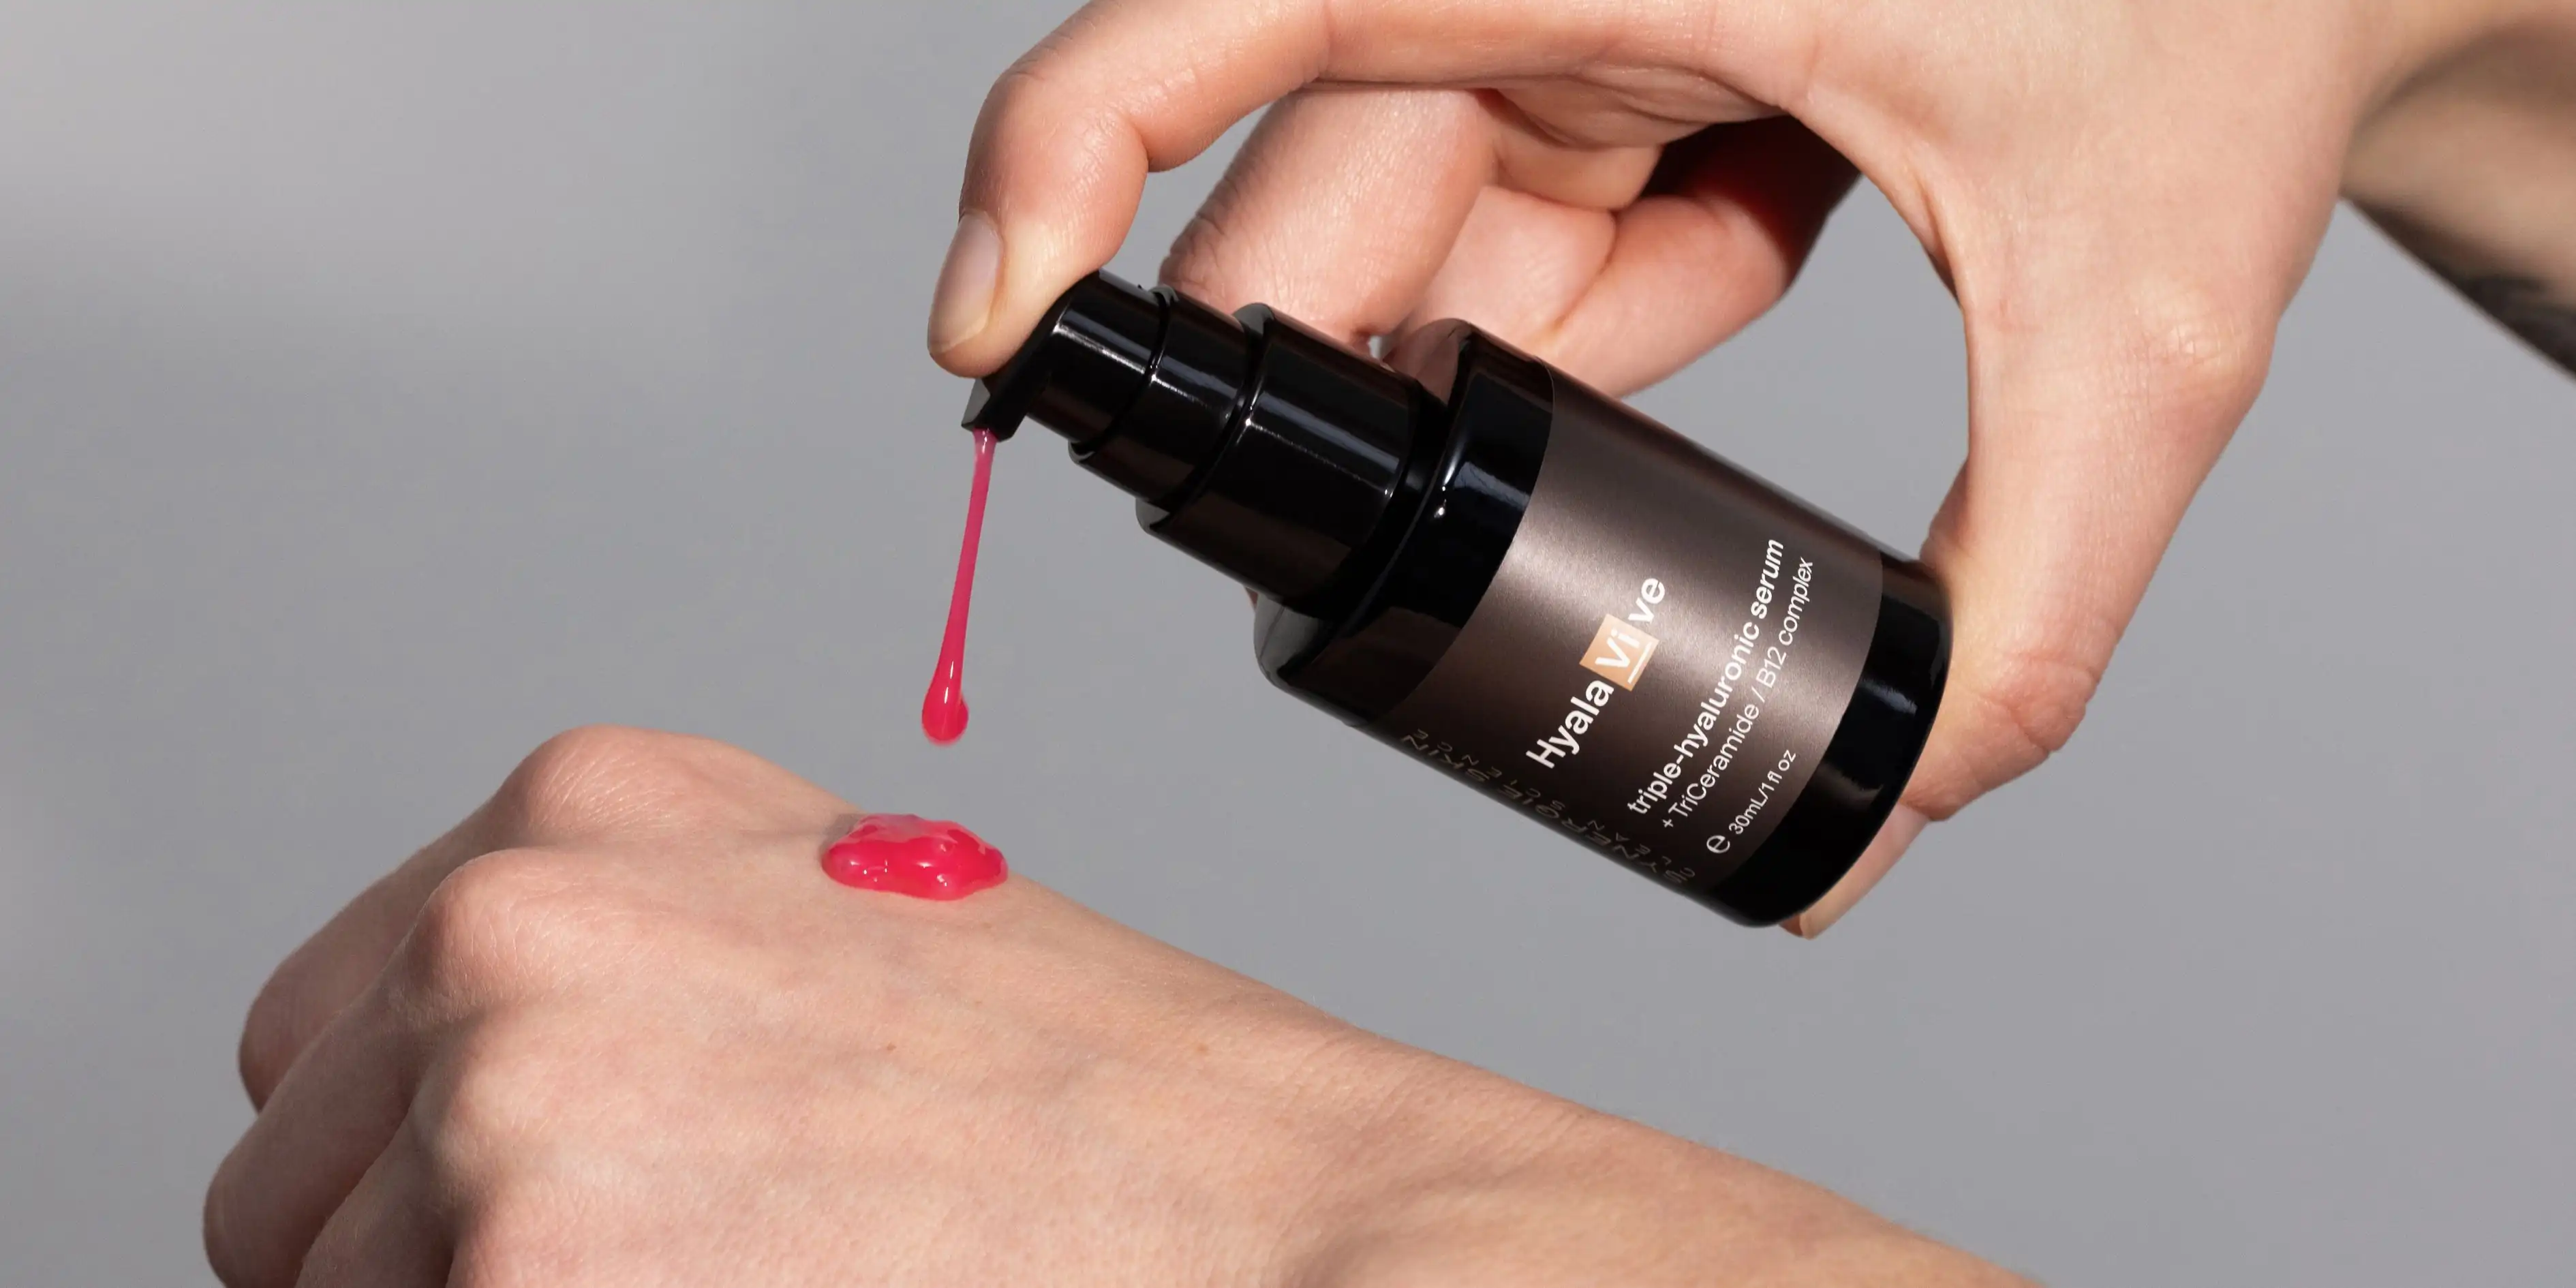 Synergie Skin's HyalaVive being pumped onto model's hand